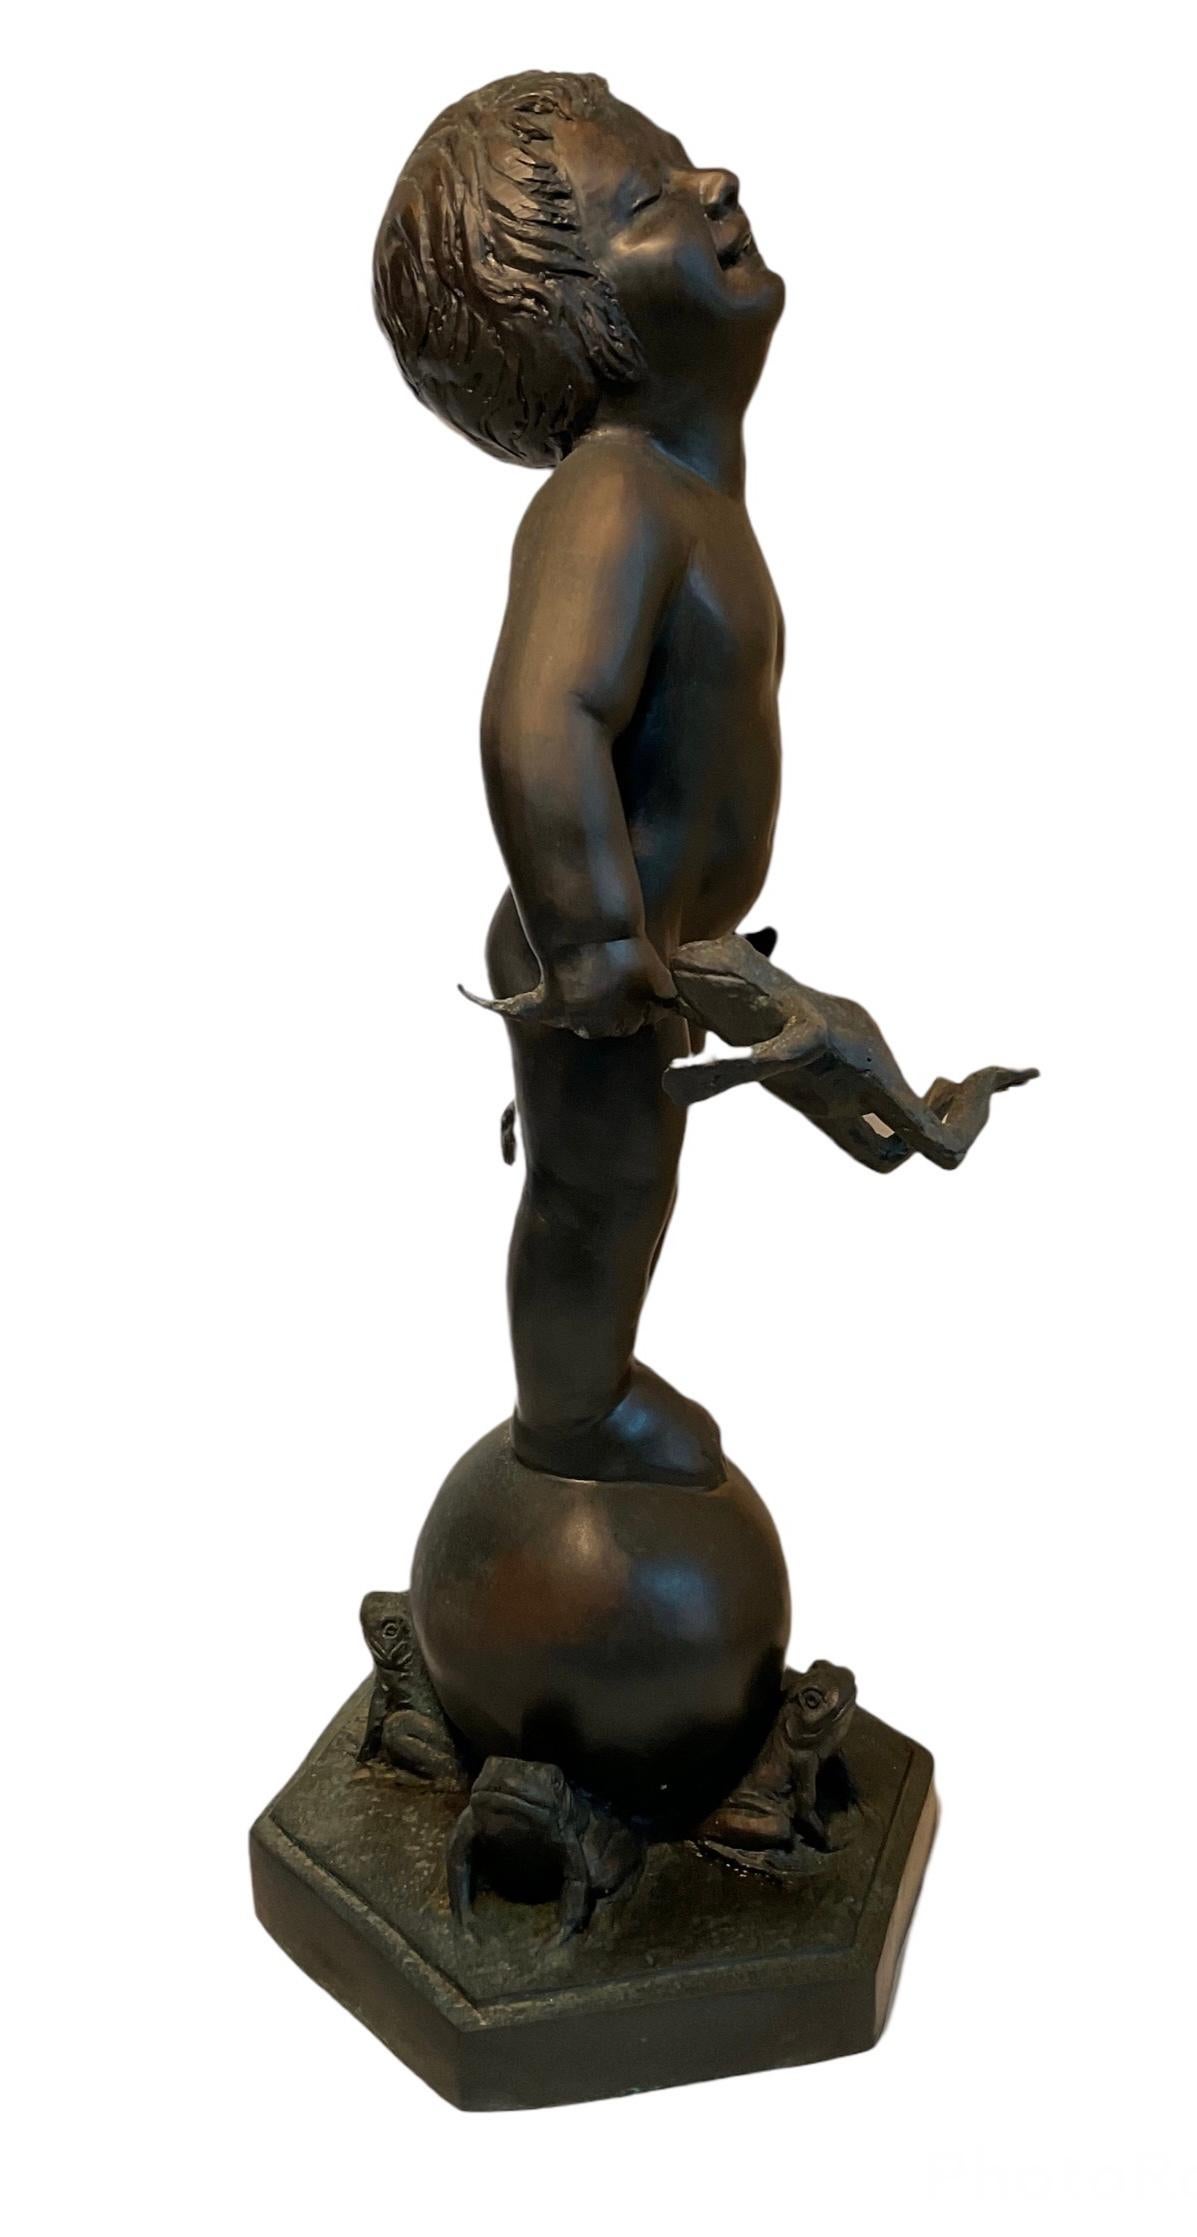 Cast Large Bronze Sculpture of a Nude Child After Edith Barreto Parsons-Frog Baby For Sale